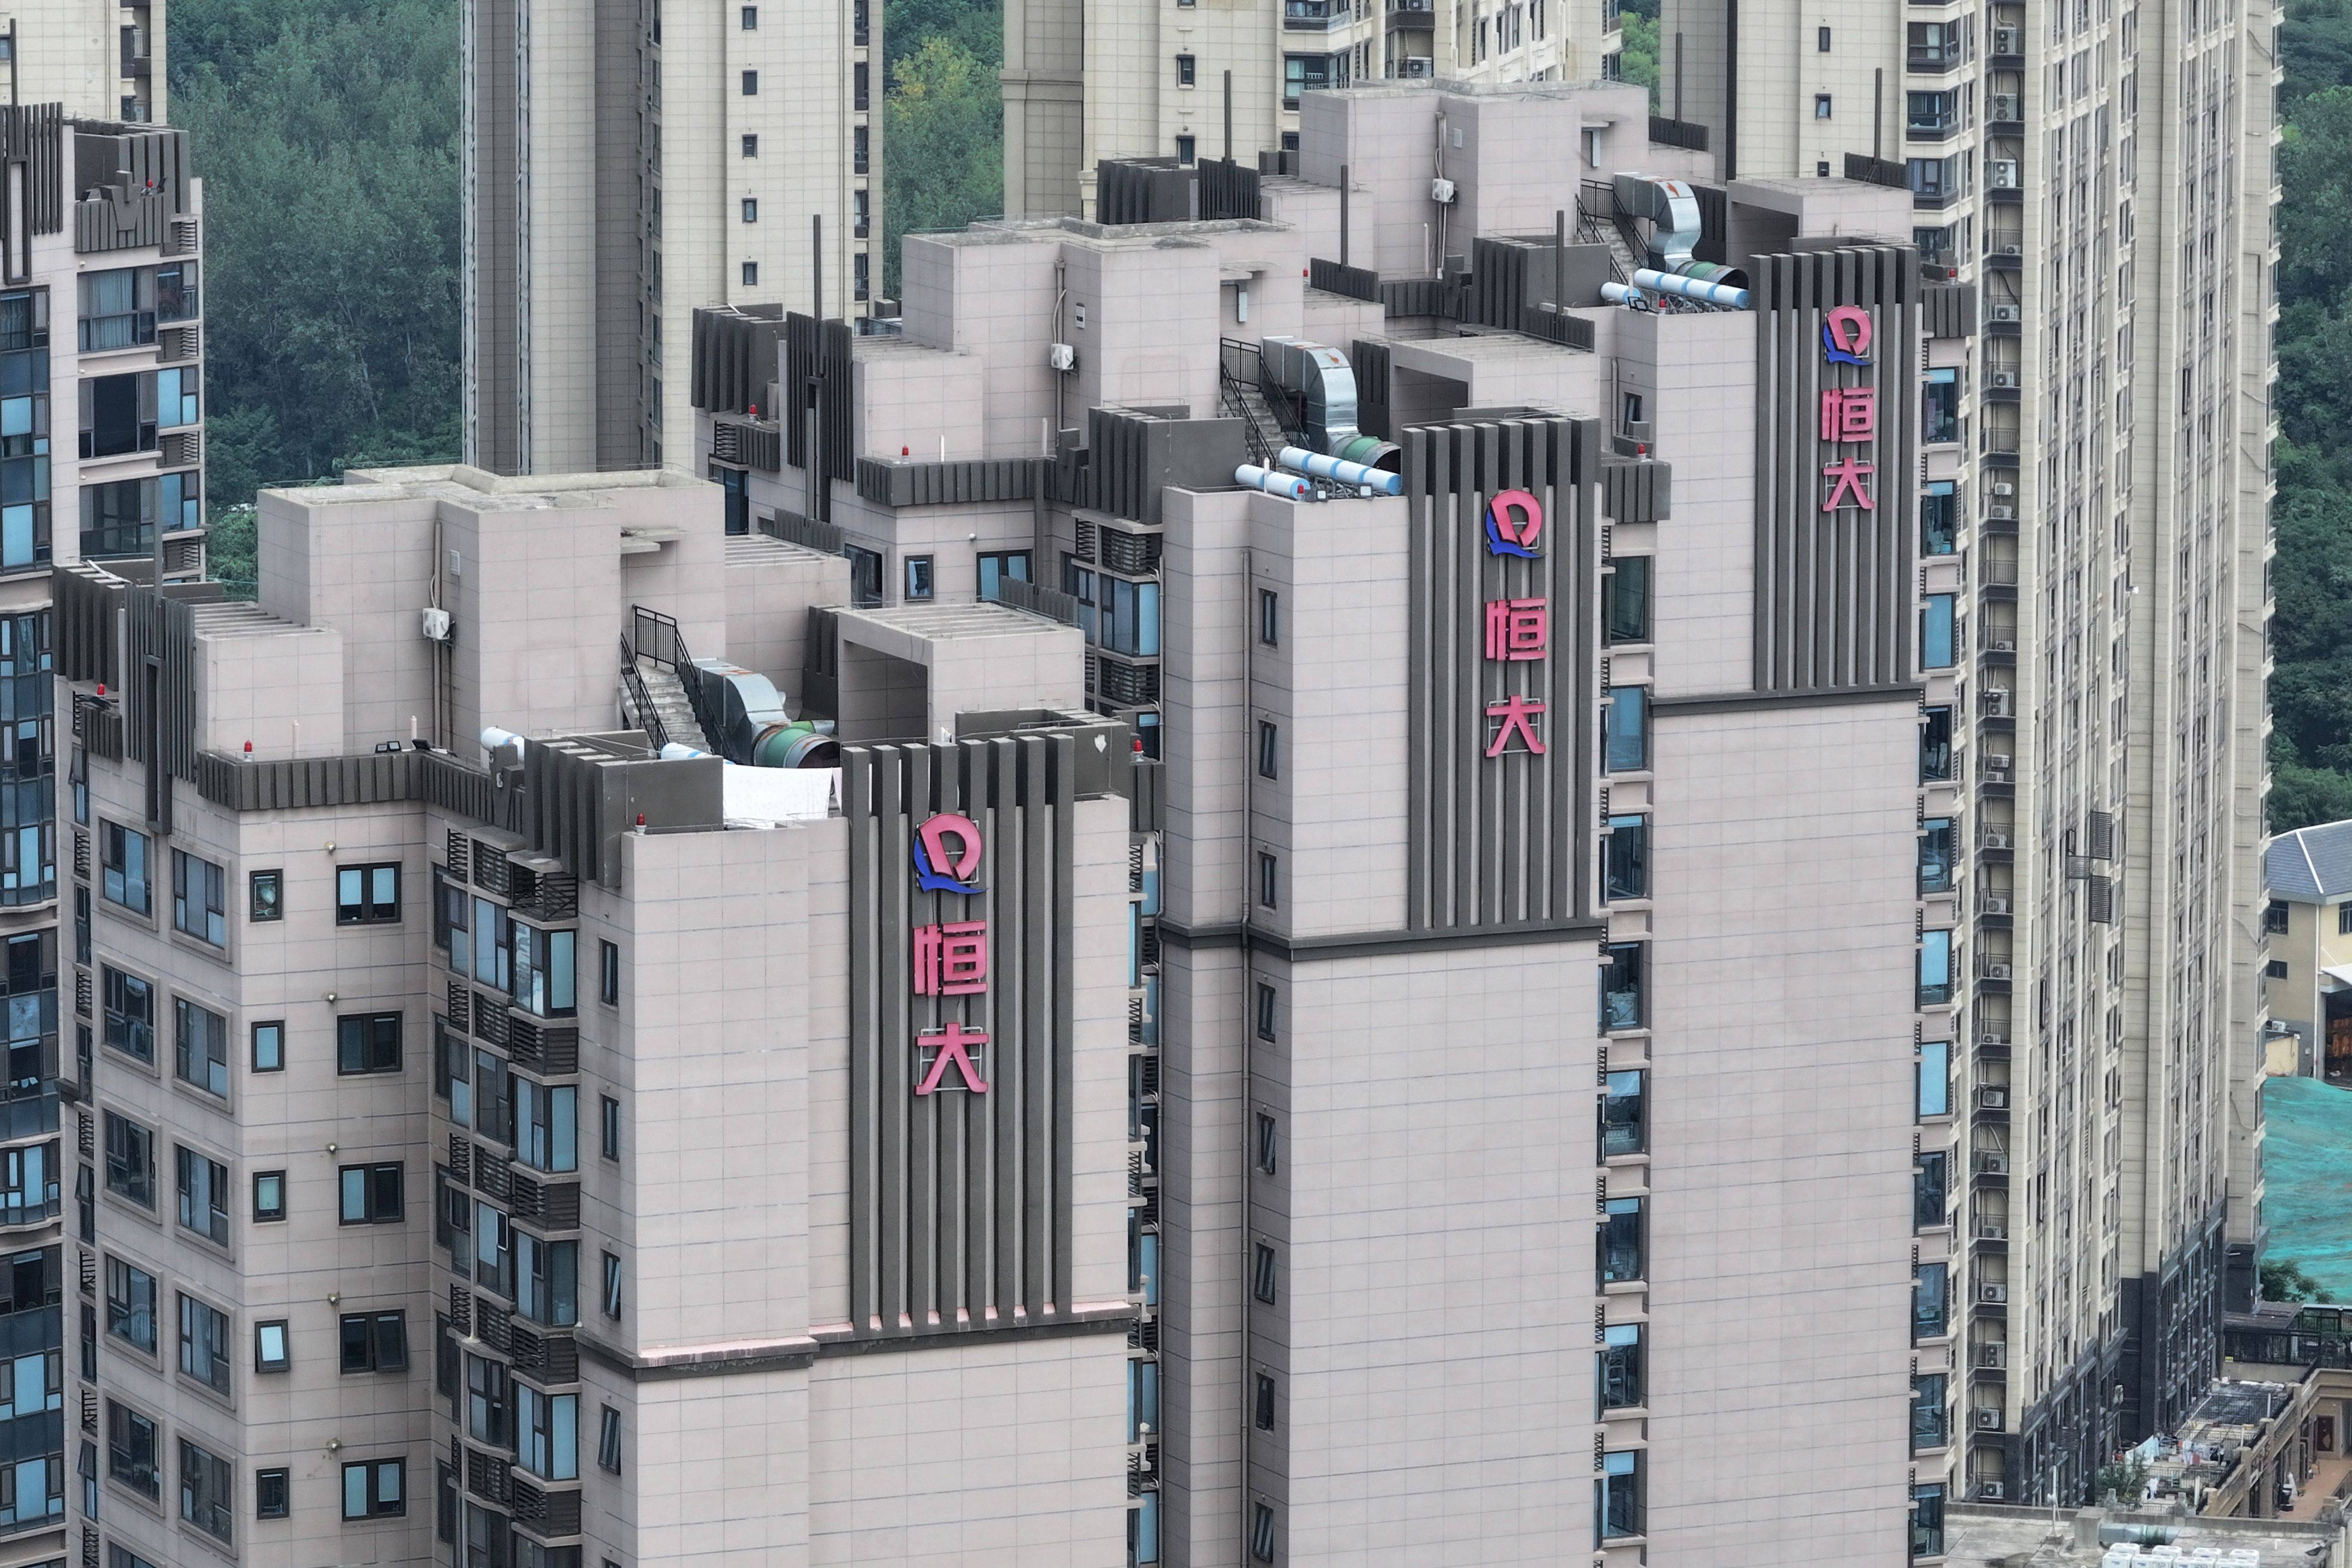 The Evergrande logo is seen on residential buildings in Nanjing, in China’s eastern Jiangsu province. The crisis at the developer’s wealth management arm comes at a time when the shadow banking industry in China has begun seeing increasing problems with repayments. Photo: AFP